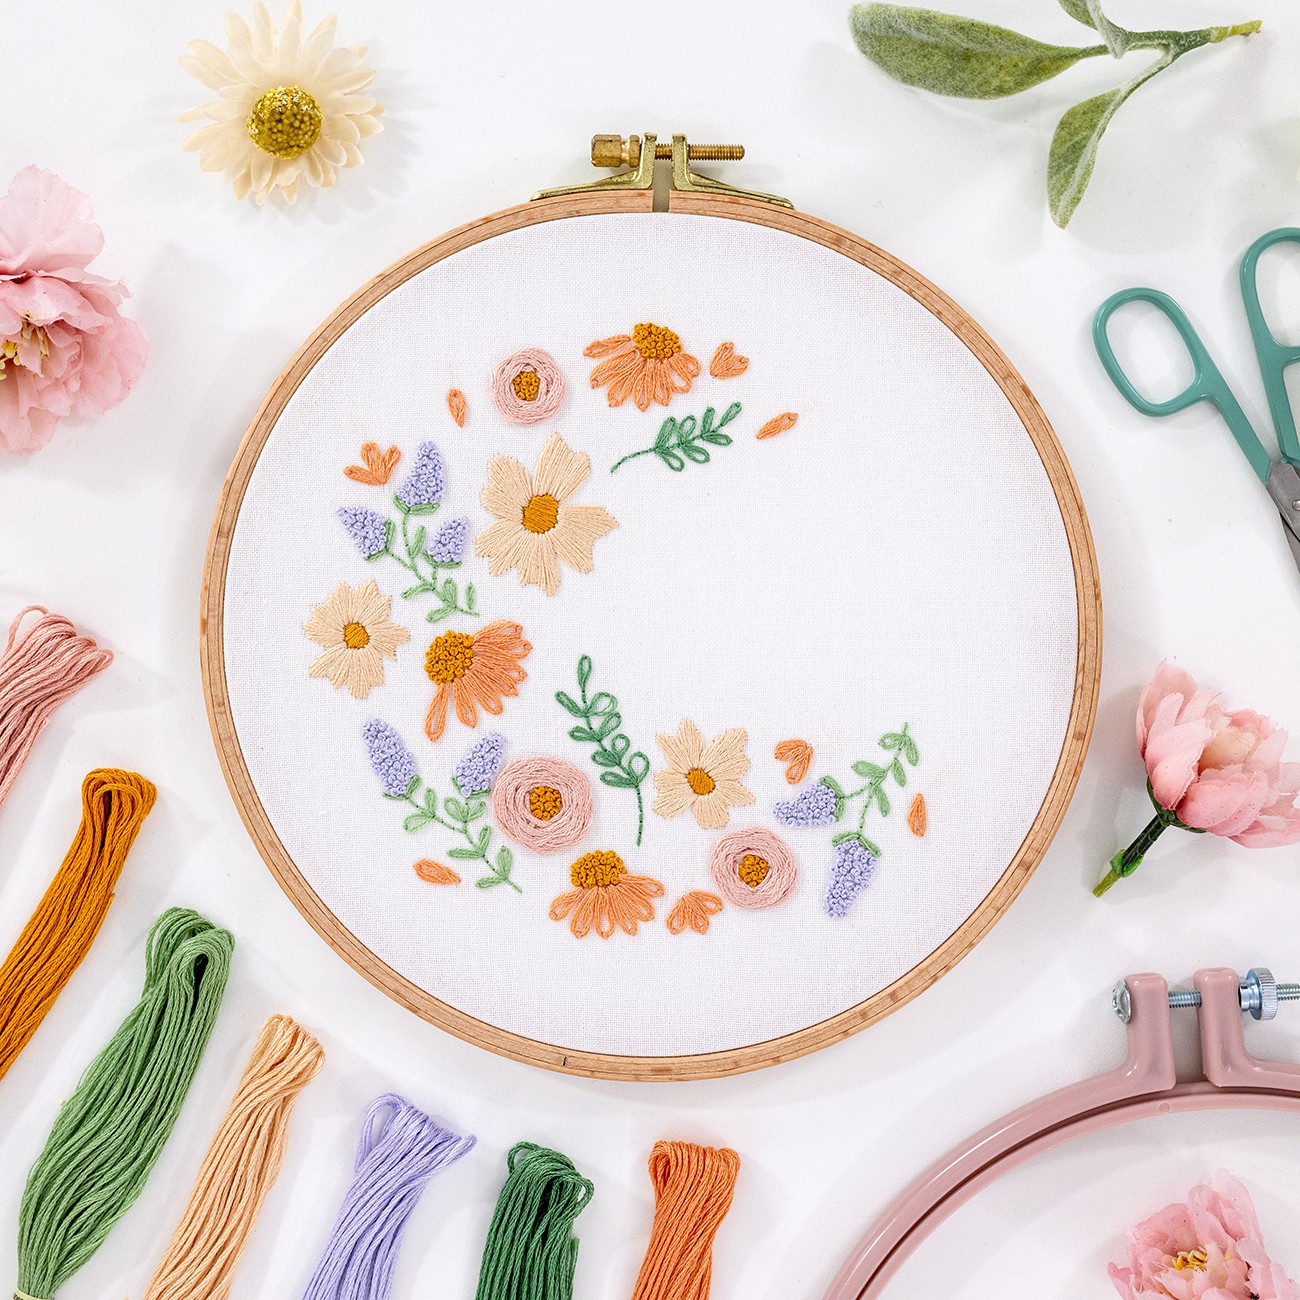 This is an image of a completed embroidery project - Blooming Lovely.